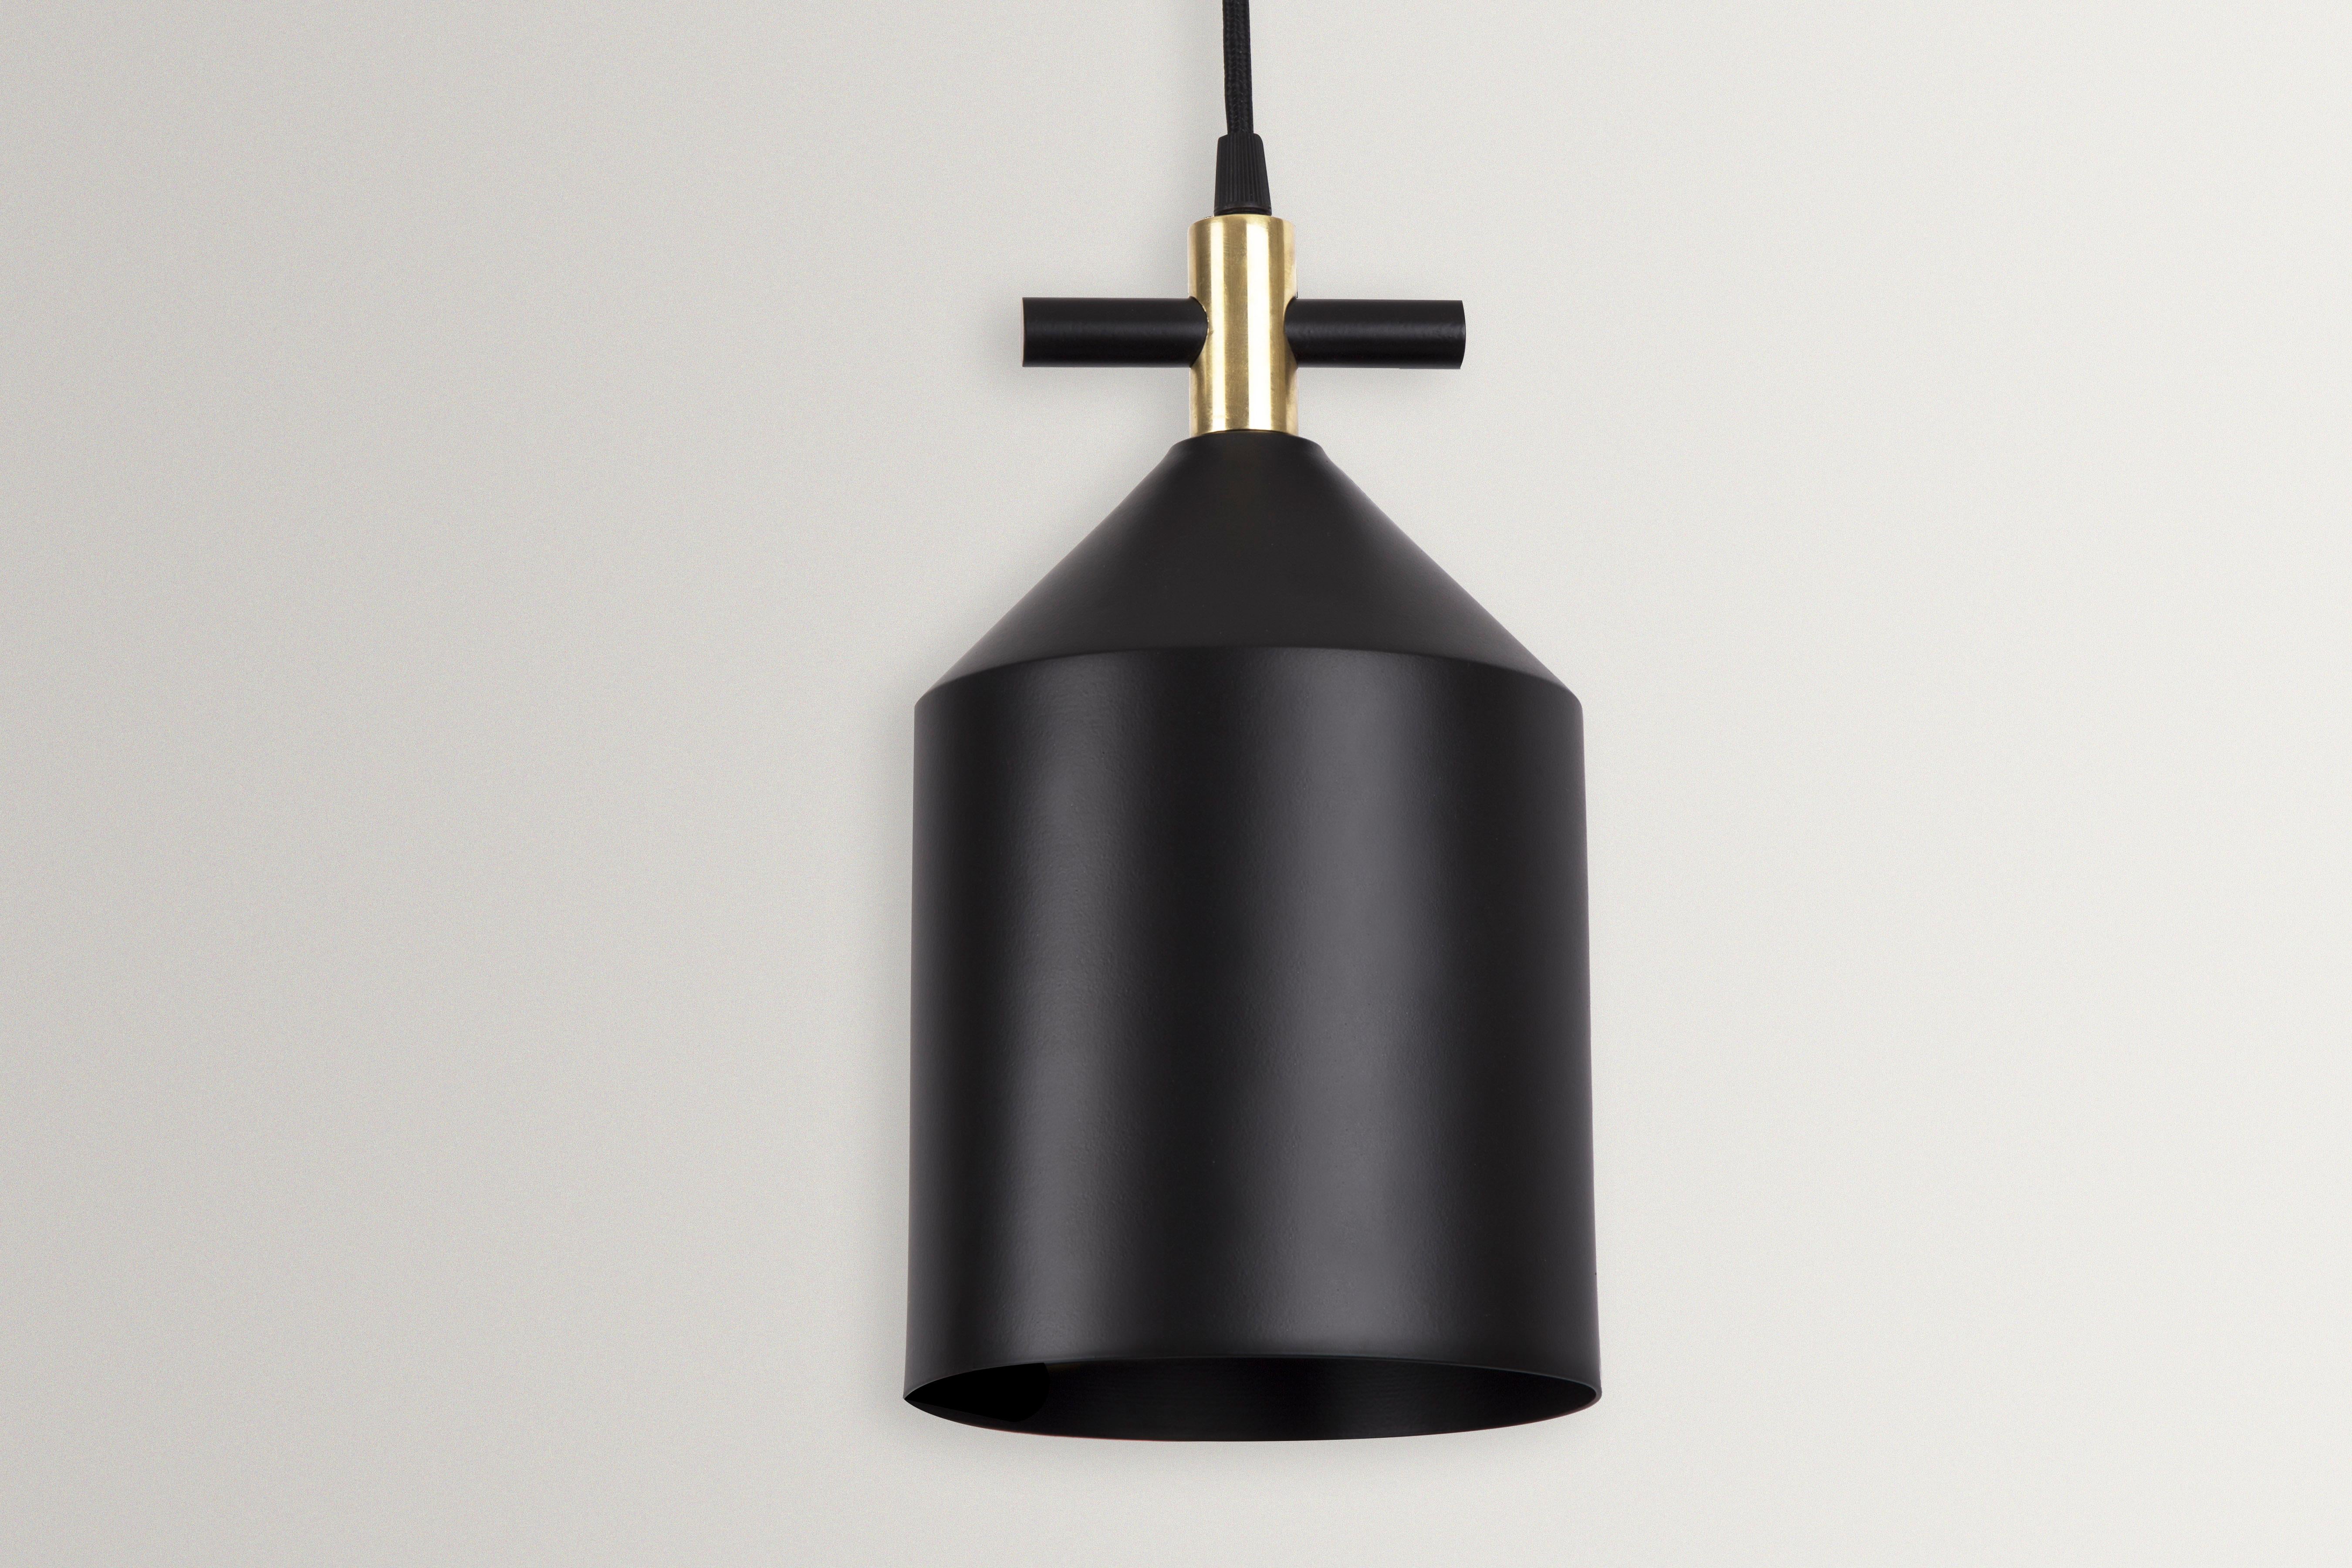 Bell pendant lamp in brass by Hatsu
Dimensions: W 15 x H 27 cm 
Materials: Powdercoated Aluminium, Brass Fabric Cord

Hatsu is a design studio based in Mumbai that creates modern lighting that are unique and immediately recognisable. We started